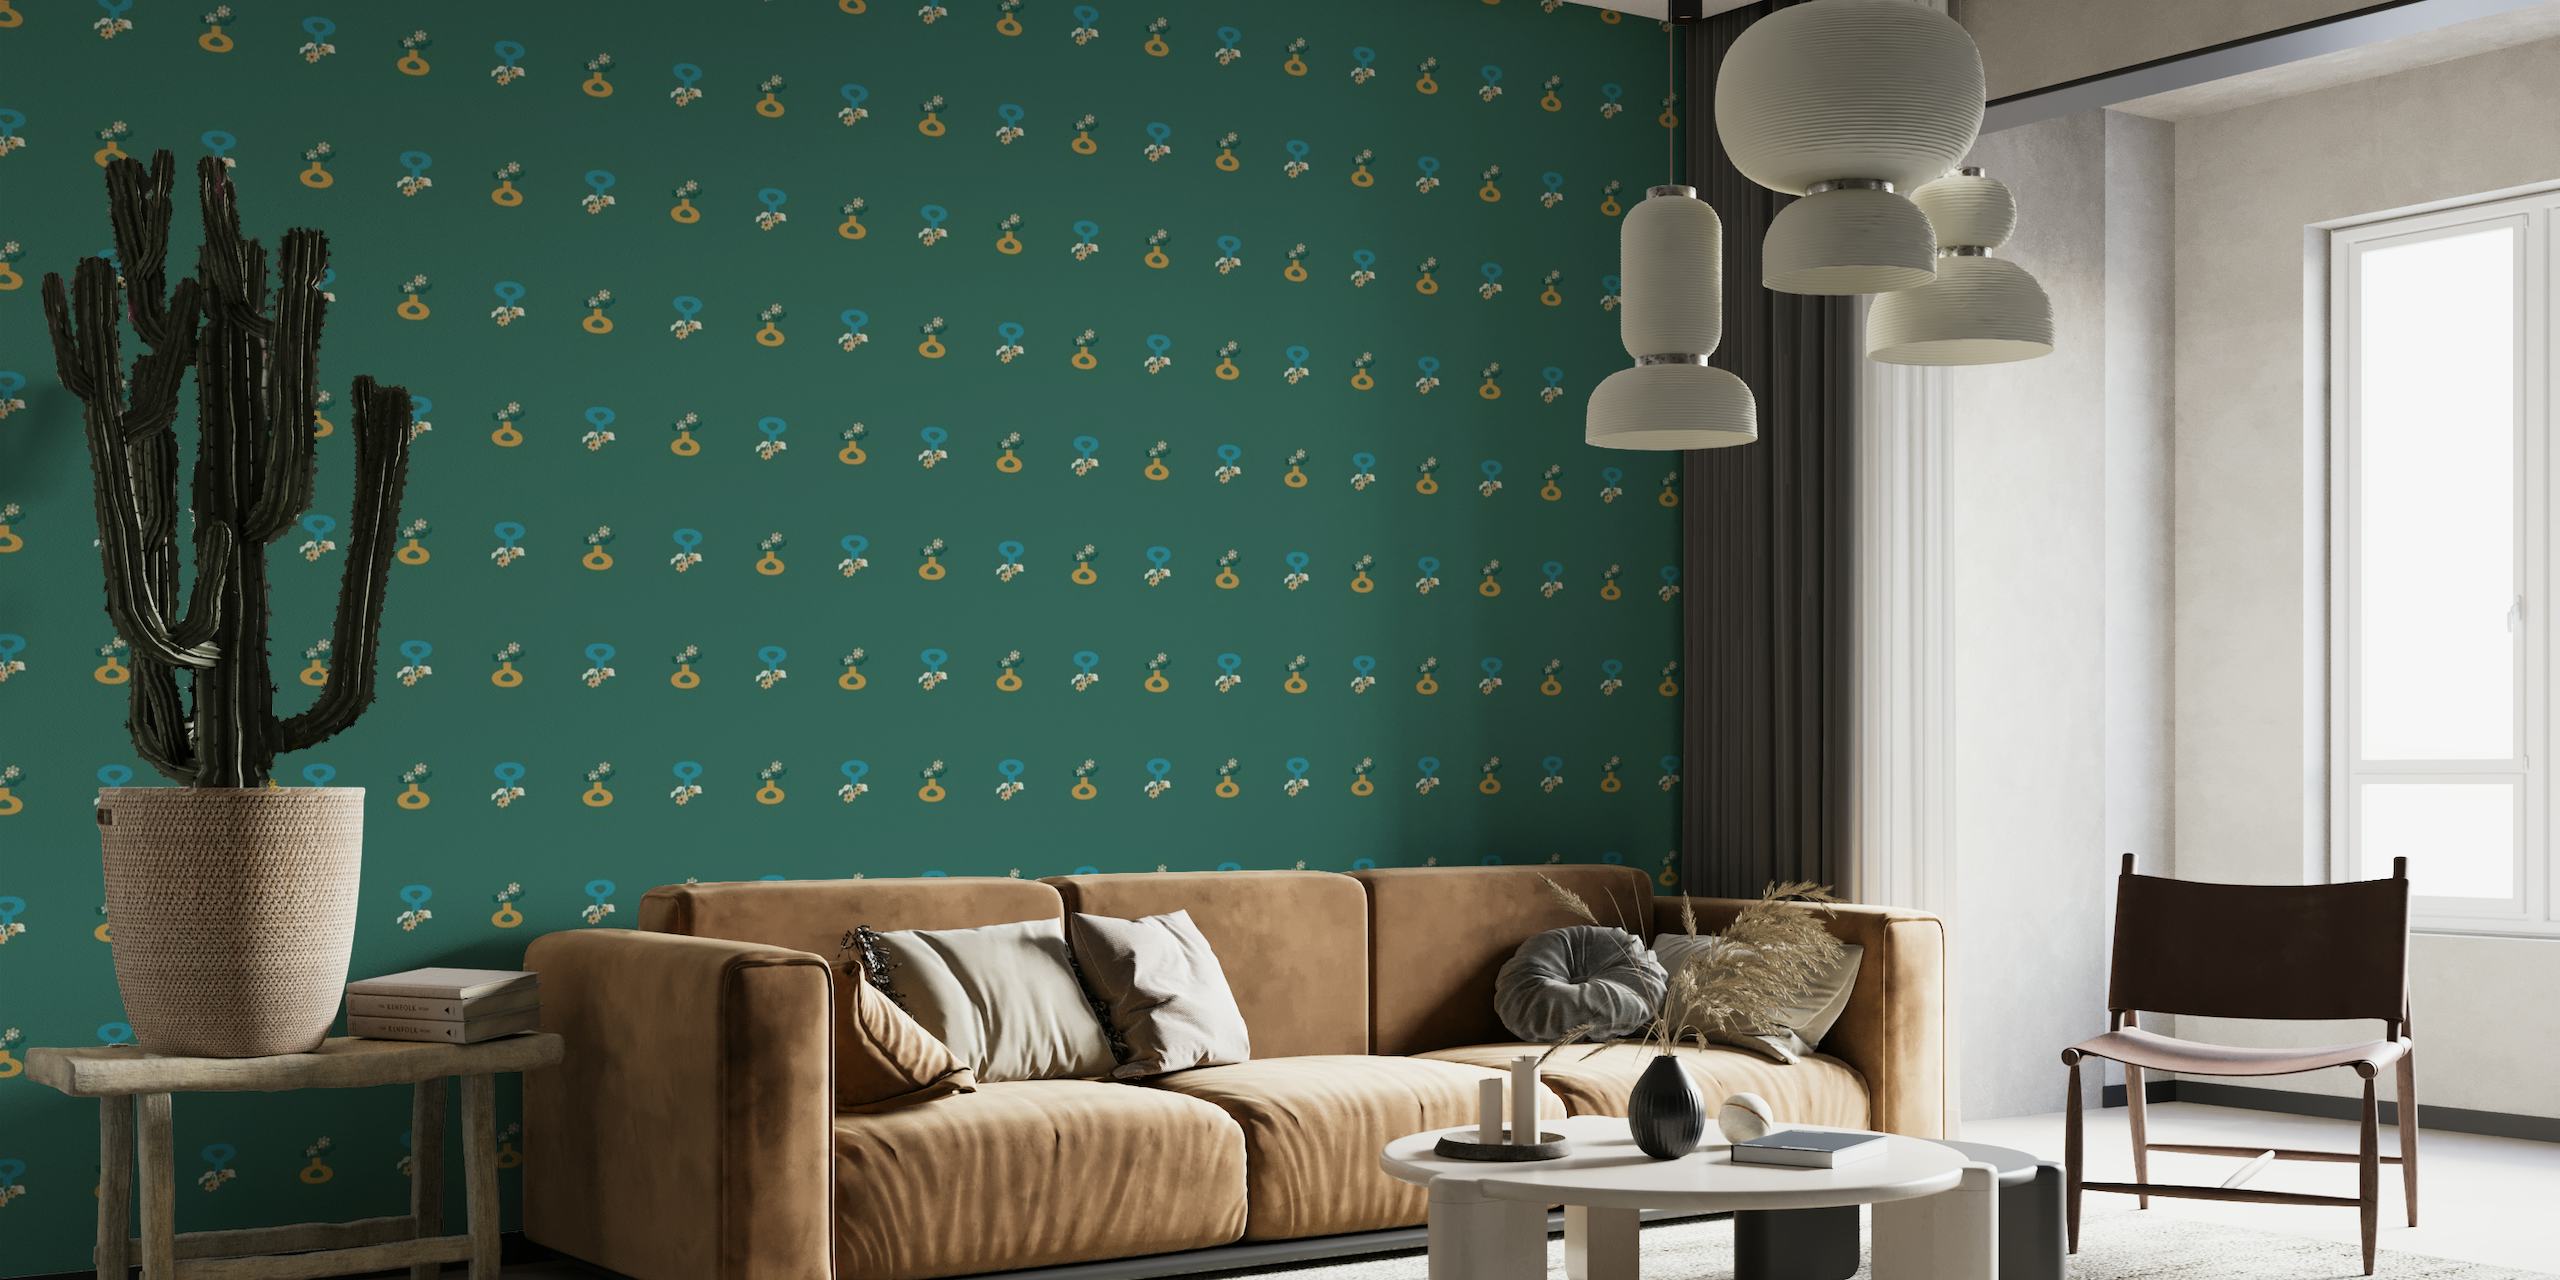 Evergreen wall mural with gold and white vase patterns